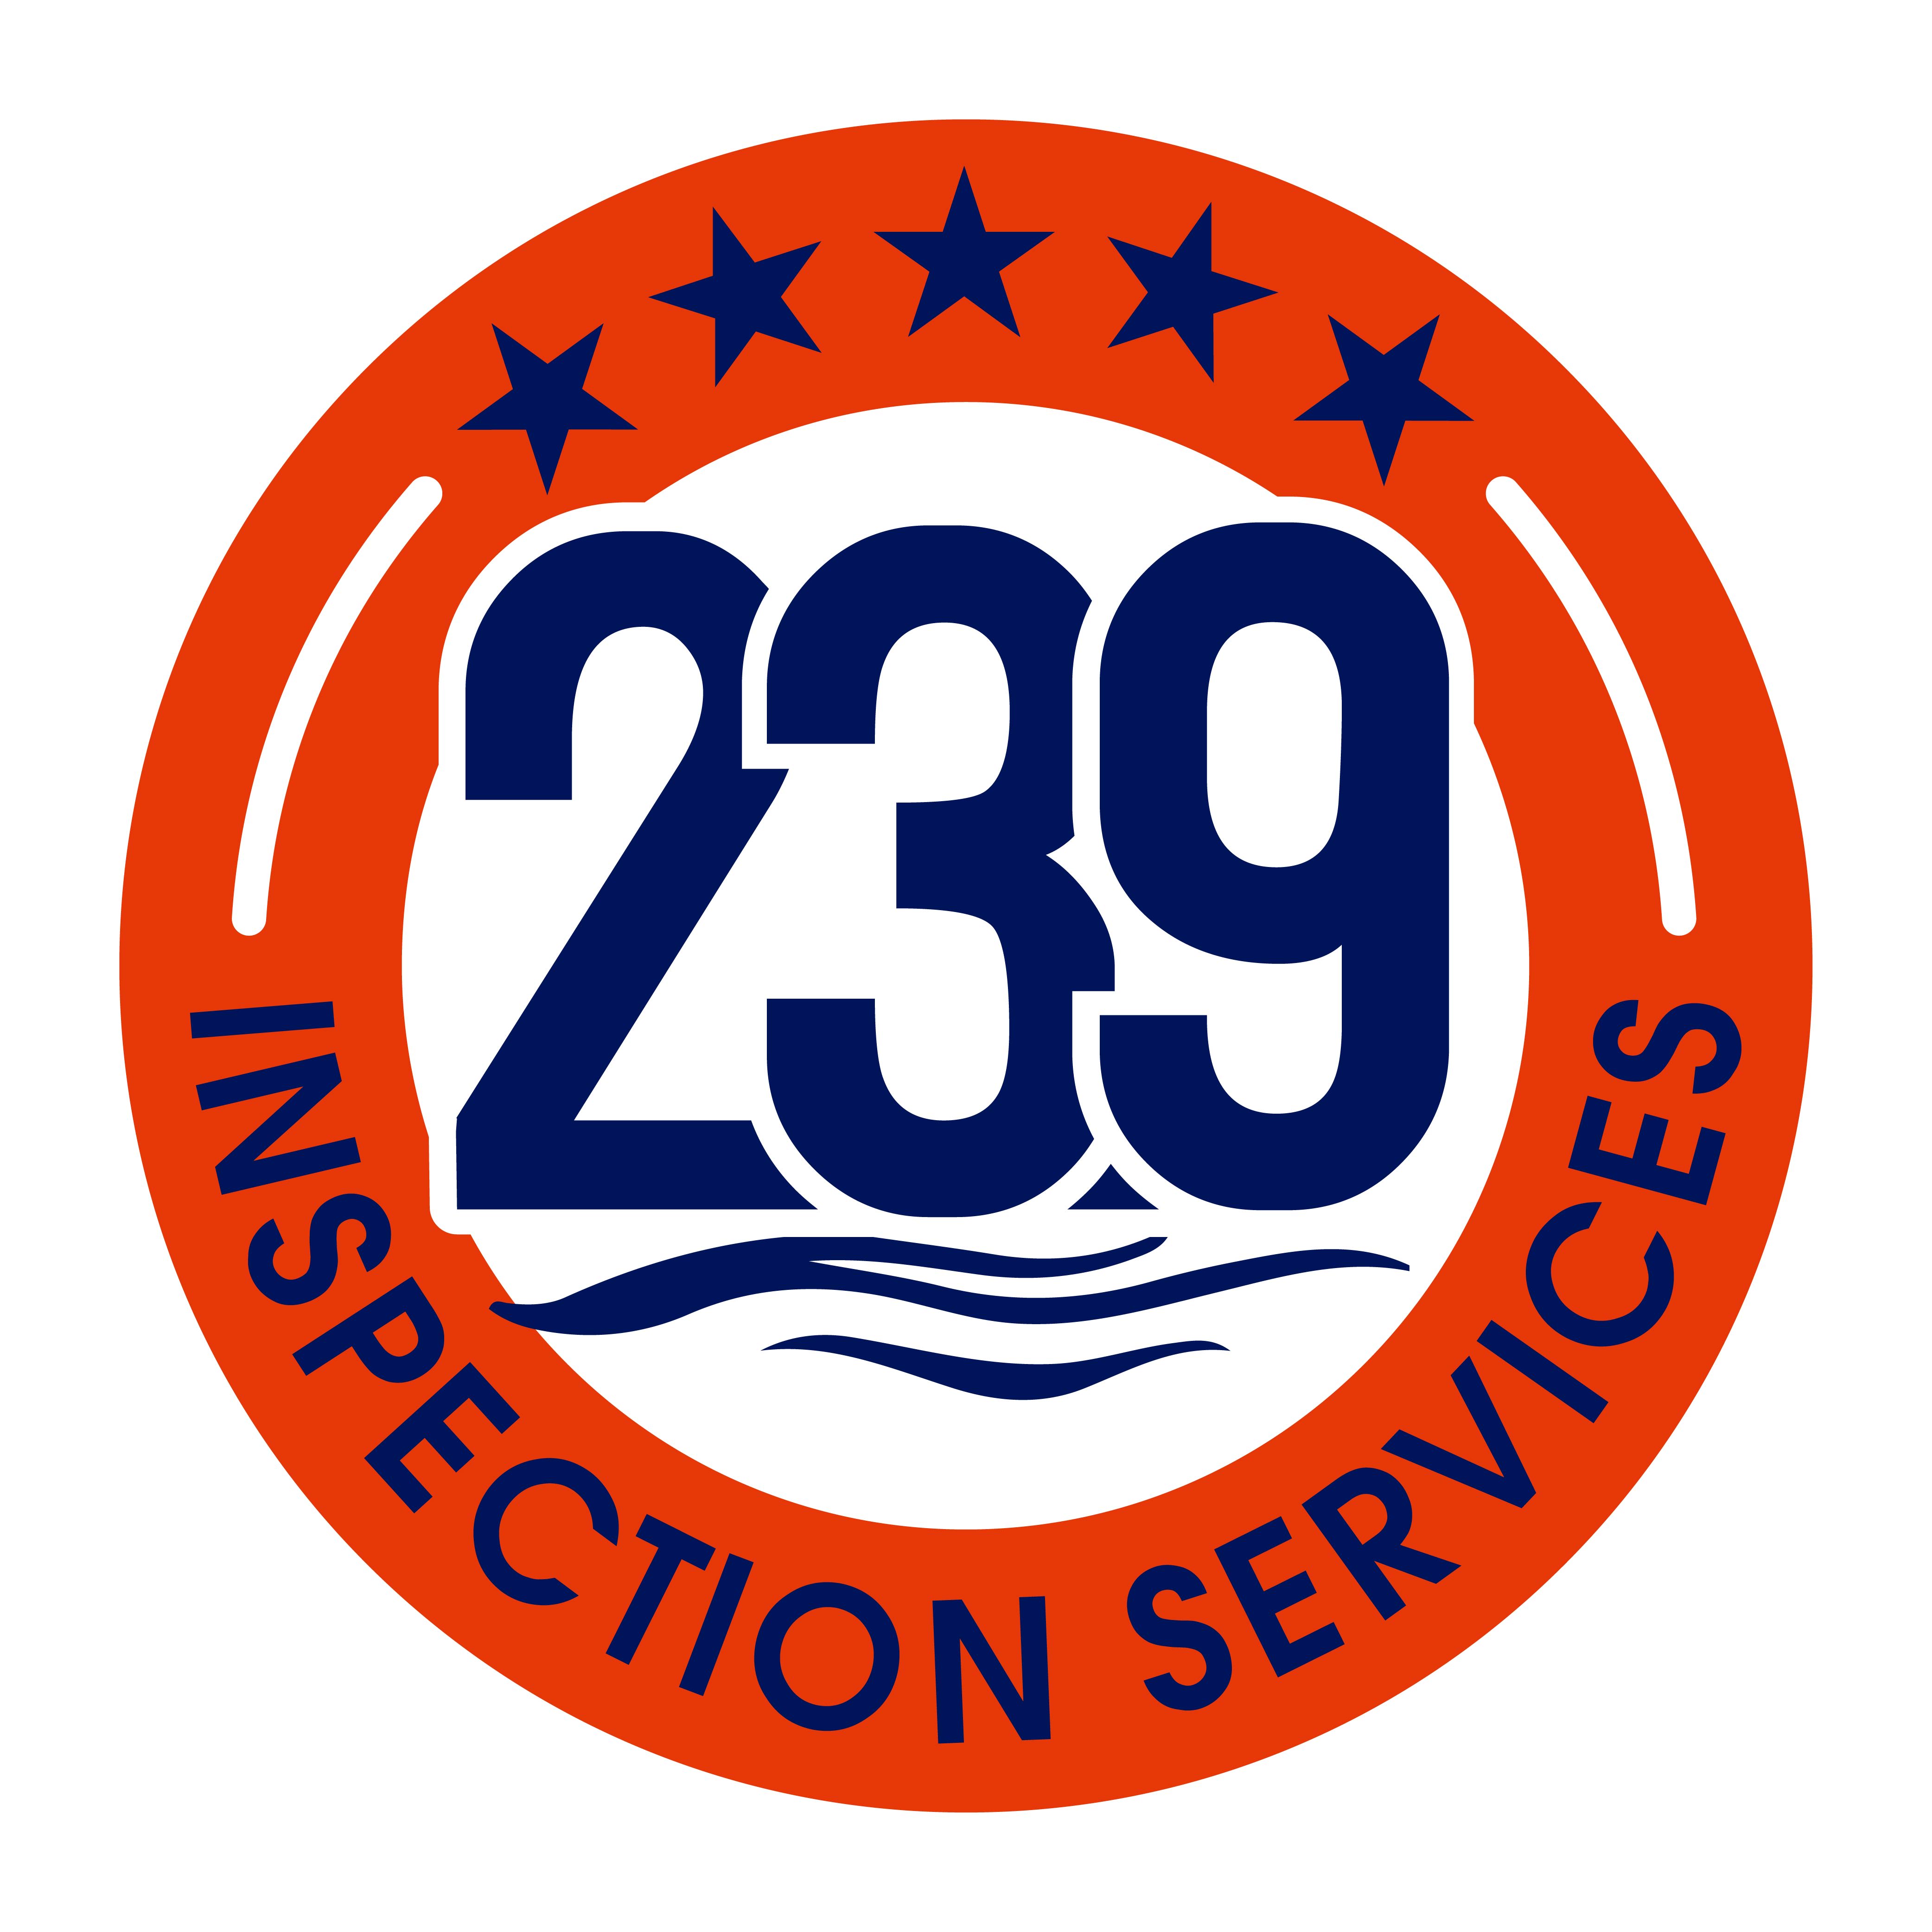 239 Inspection Services Logo